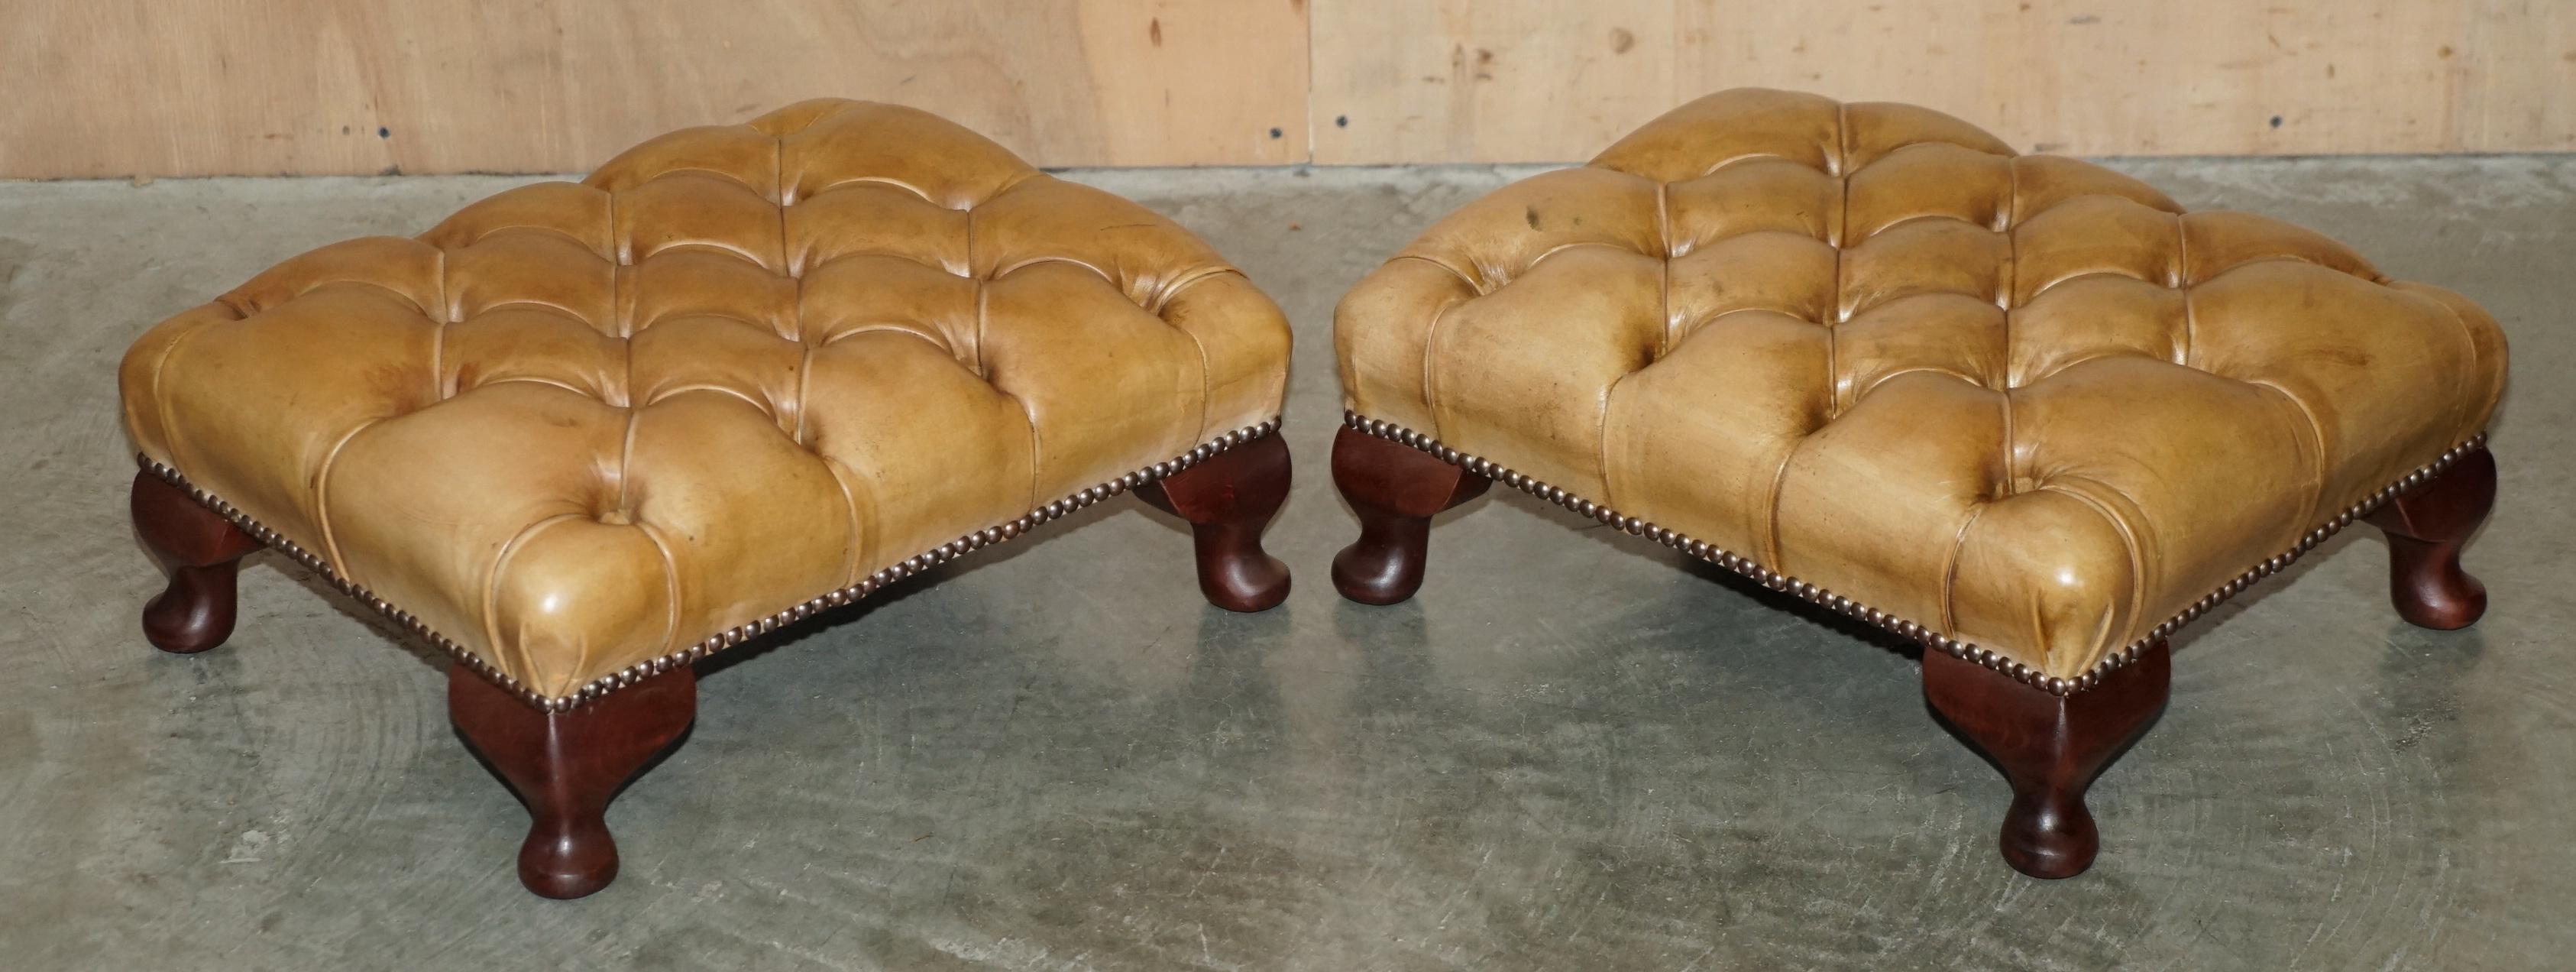 PAIR OF VINTAGE Tan BROWN LEATHER CHESTERFiELD WINGBACK CHAIRS WITH FOOTSTOOLS im Angebot 9